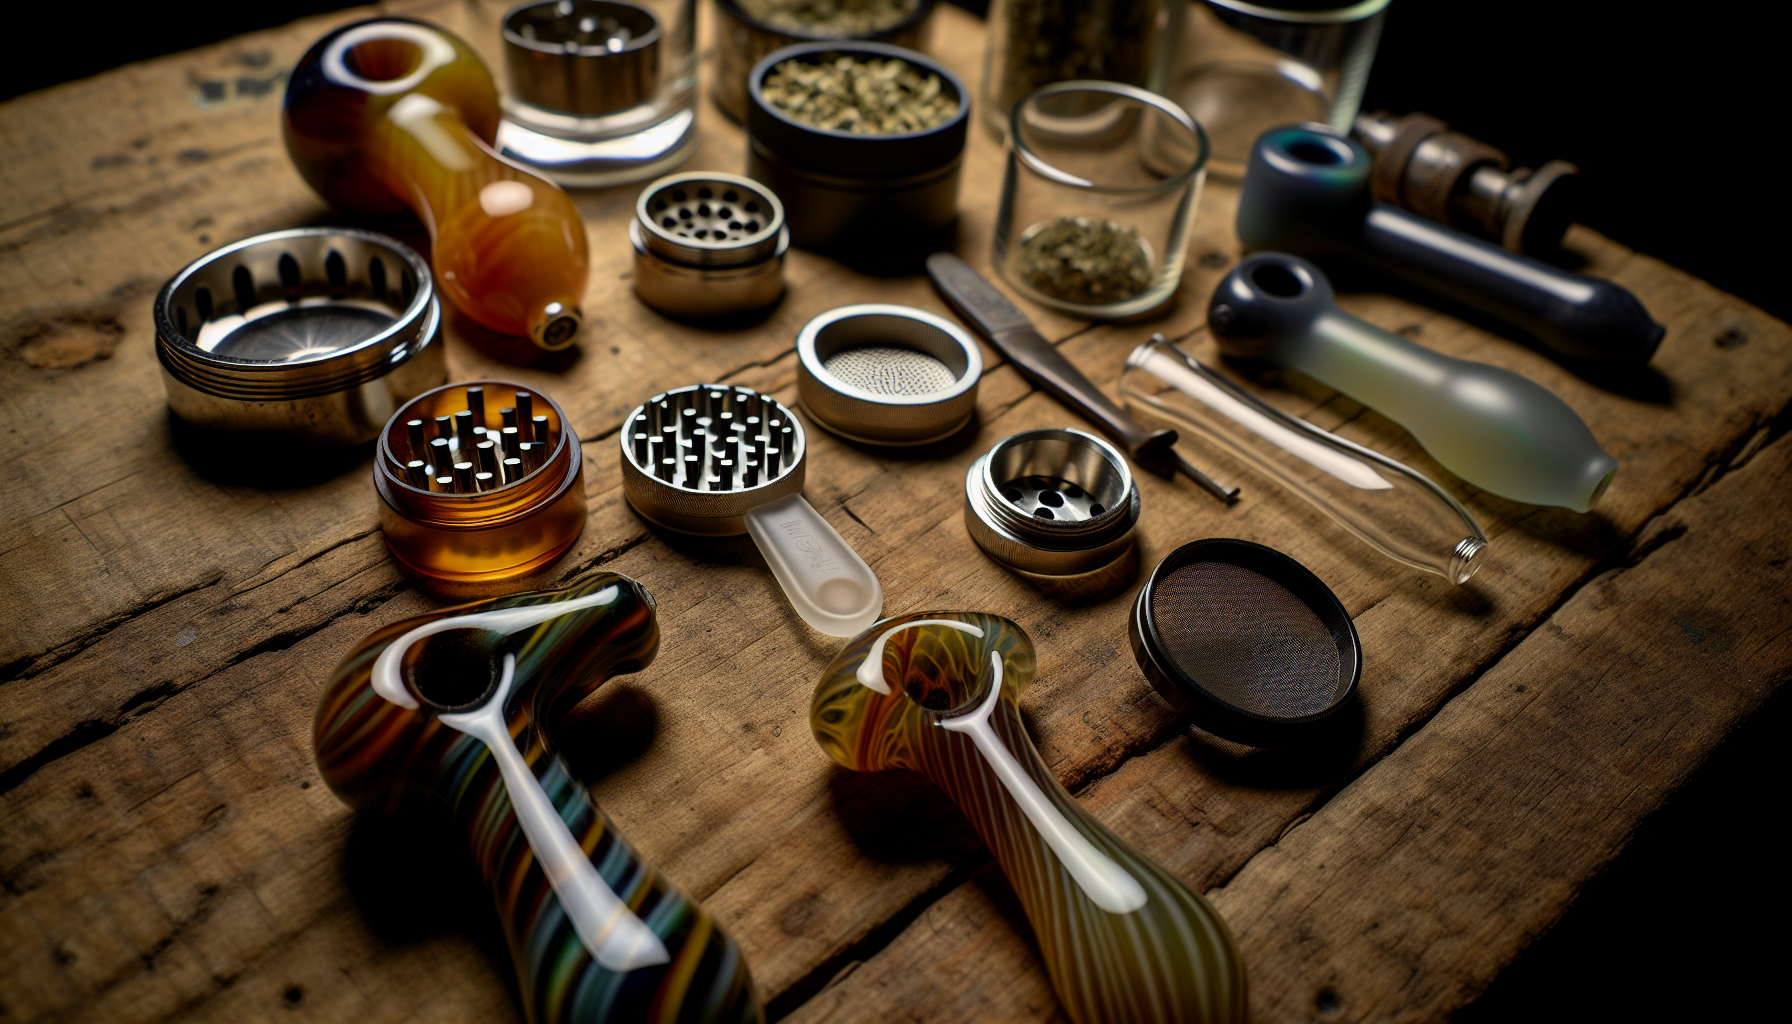 Glass pipe accessories including grinders and screens